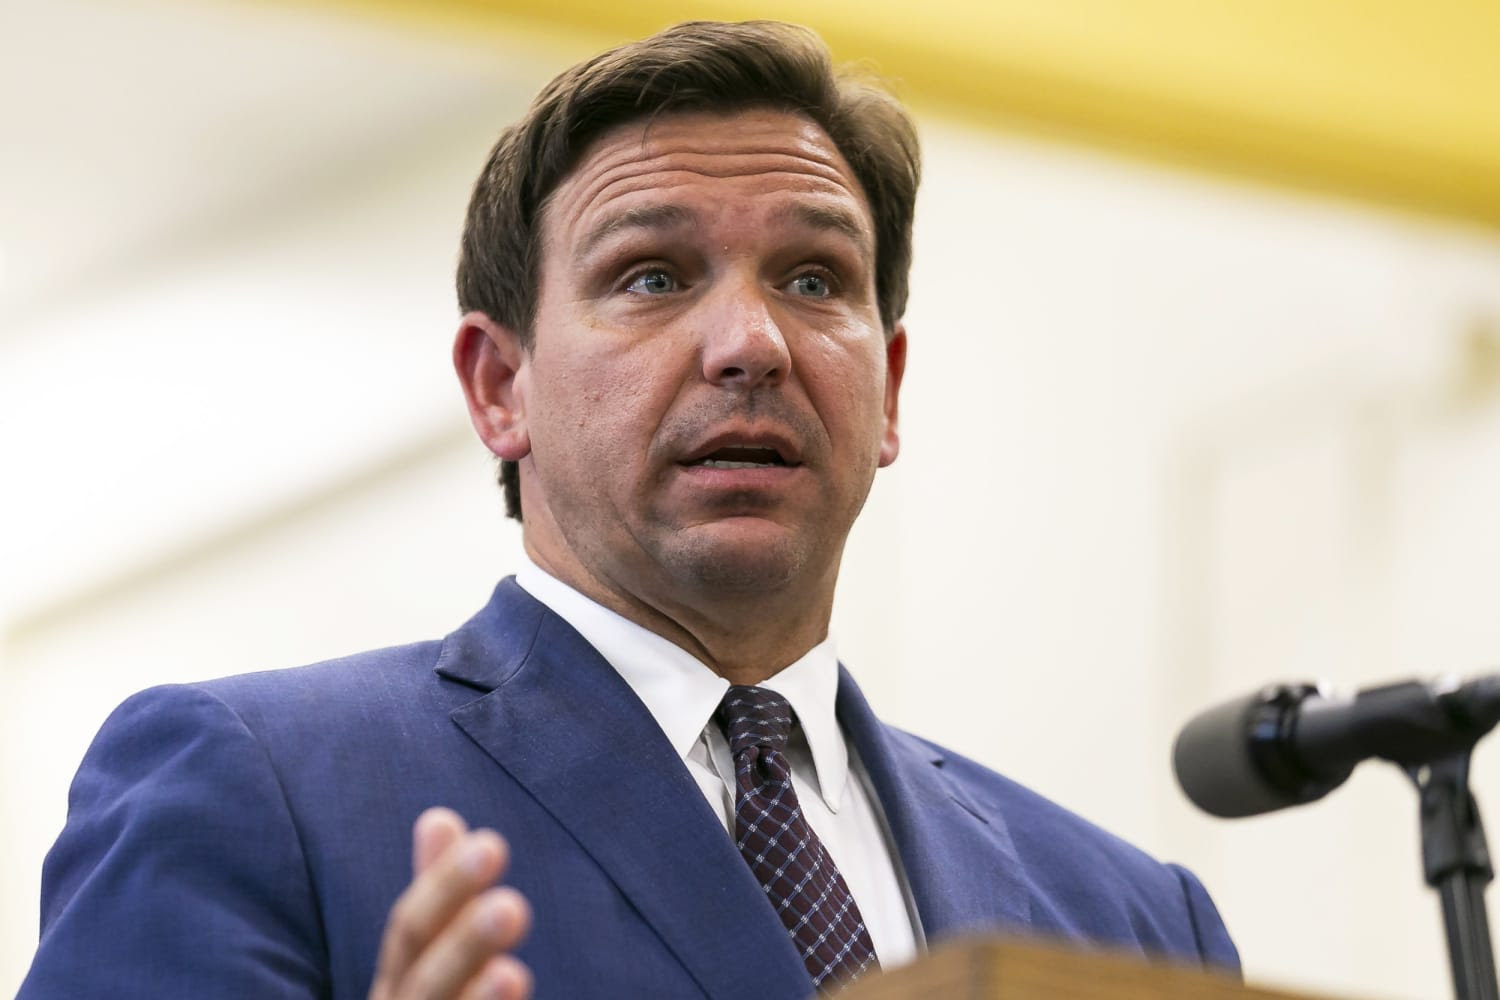 Does DeSantis have a response plan for the crisis unfolding in Florida?